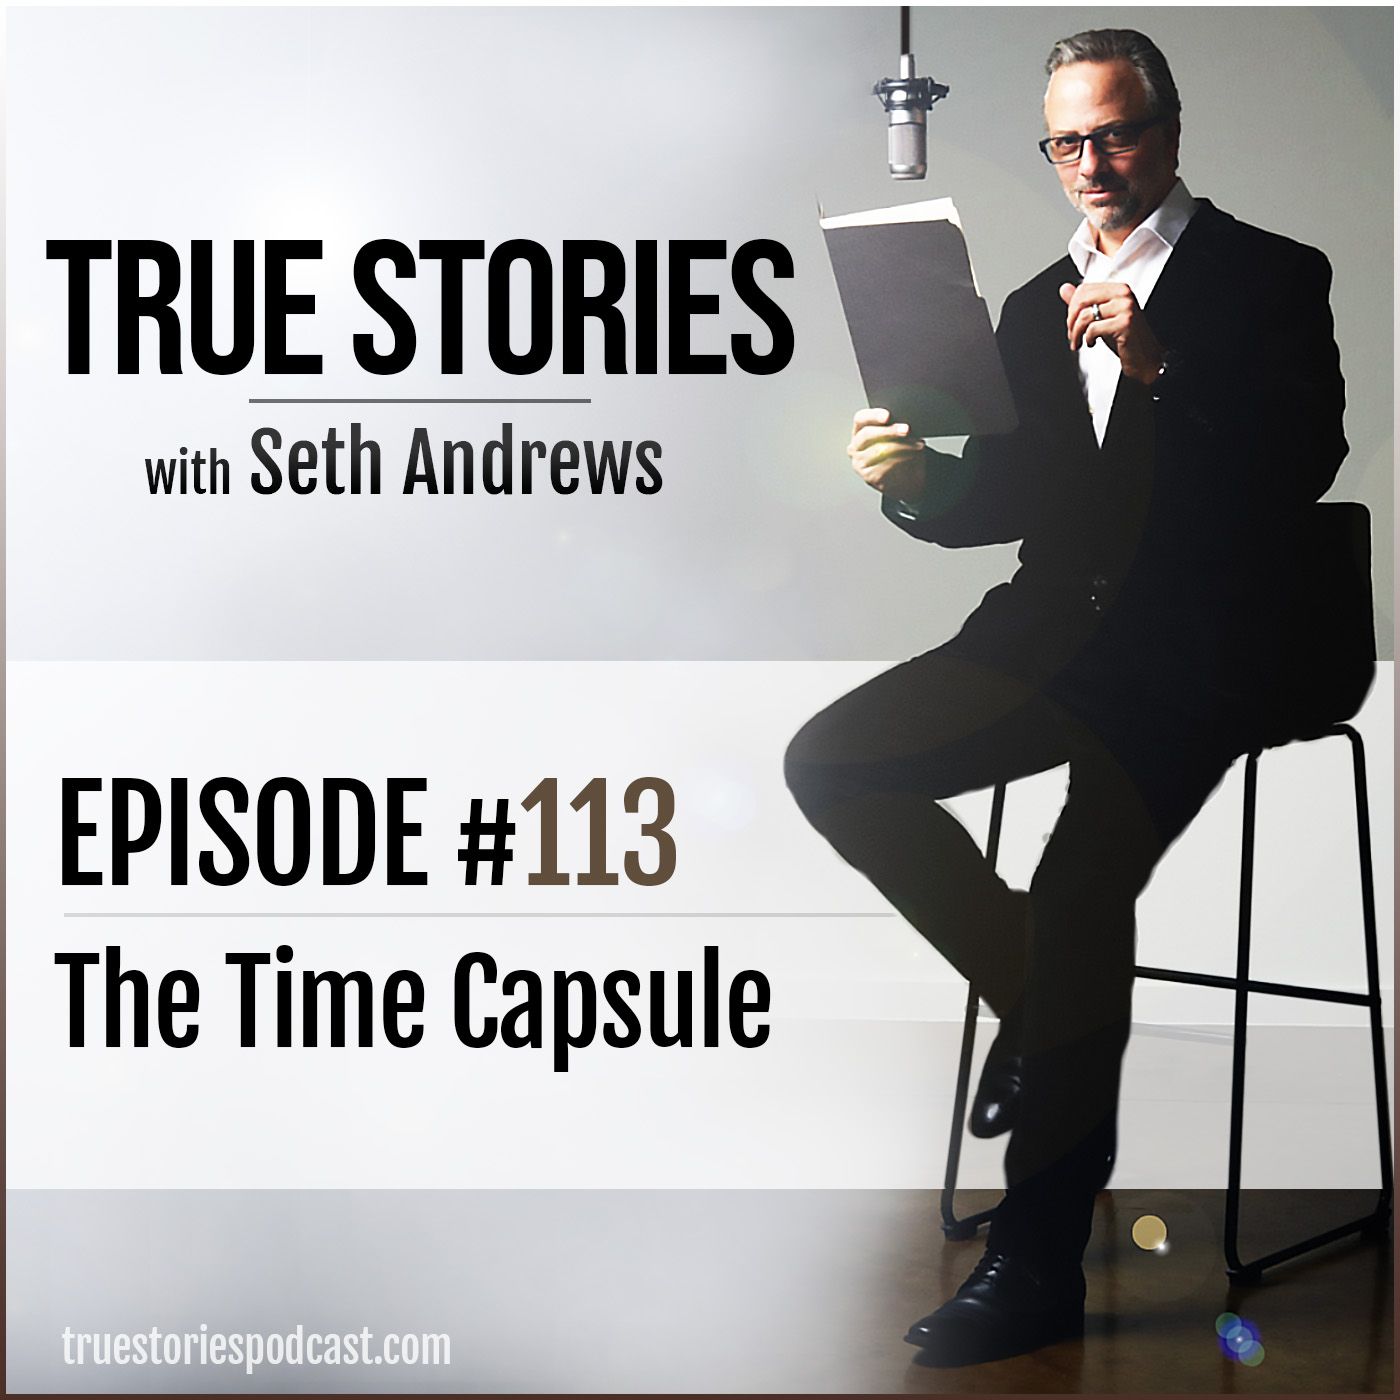 True Stories #113 - The Time Capsule